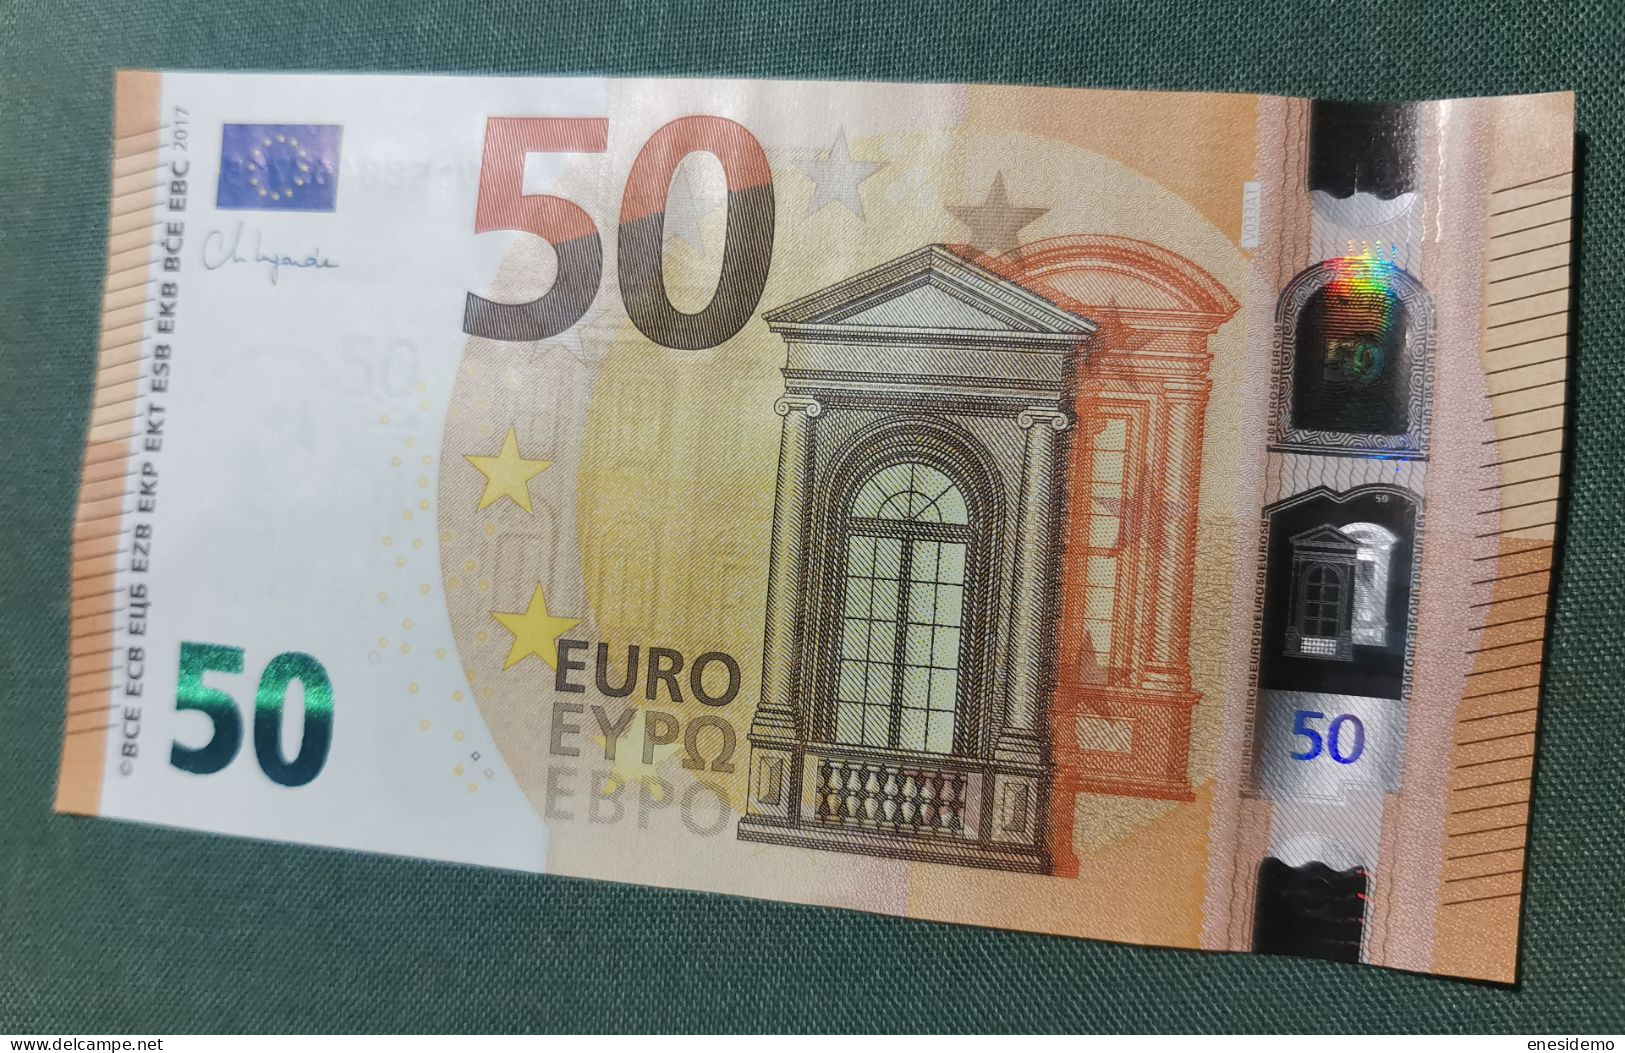 50 EURO SPAIN 2017 LAGARDE V033A1 VD SC FDS UNCIRCULATED PERFECT